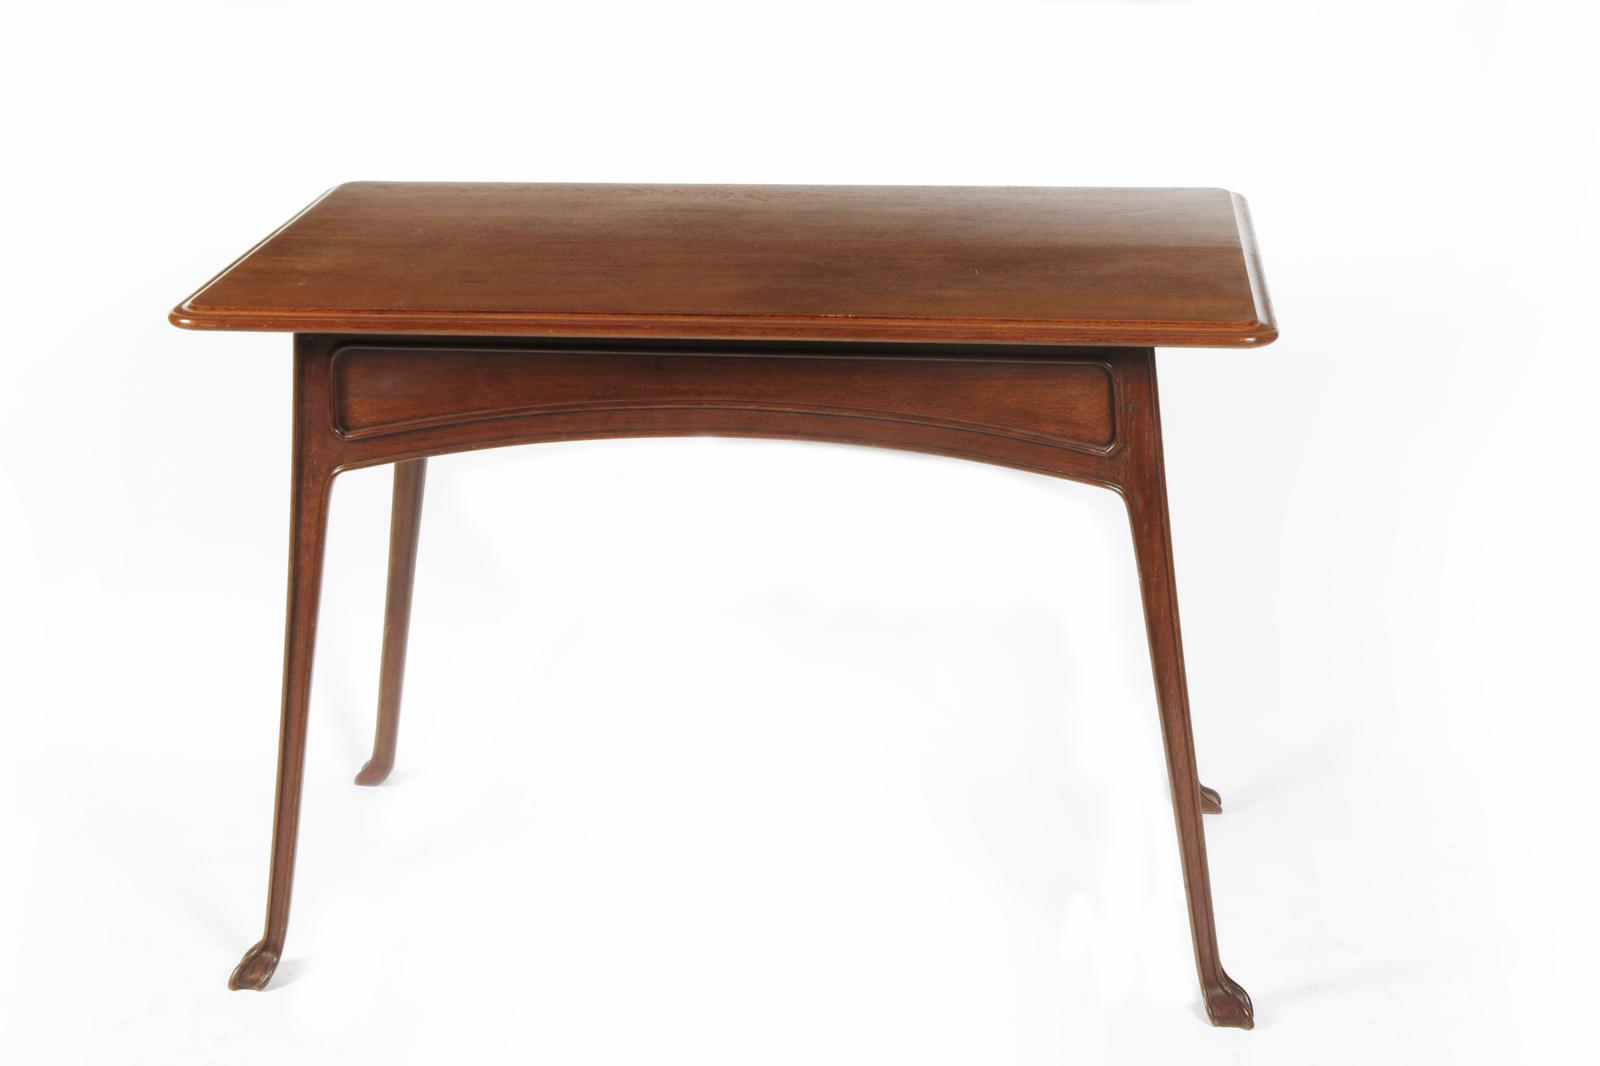 An Art Nouveau carved mahogany table designed by Edouard Colonna, rectangular top on slender